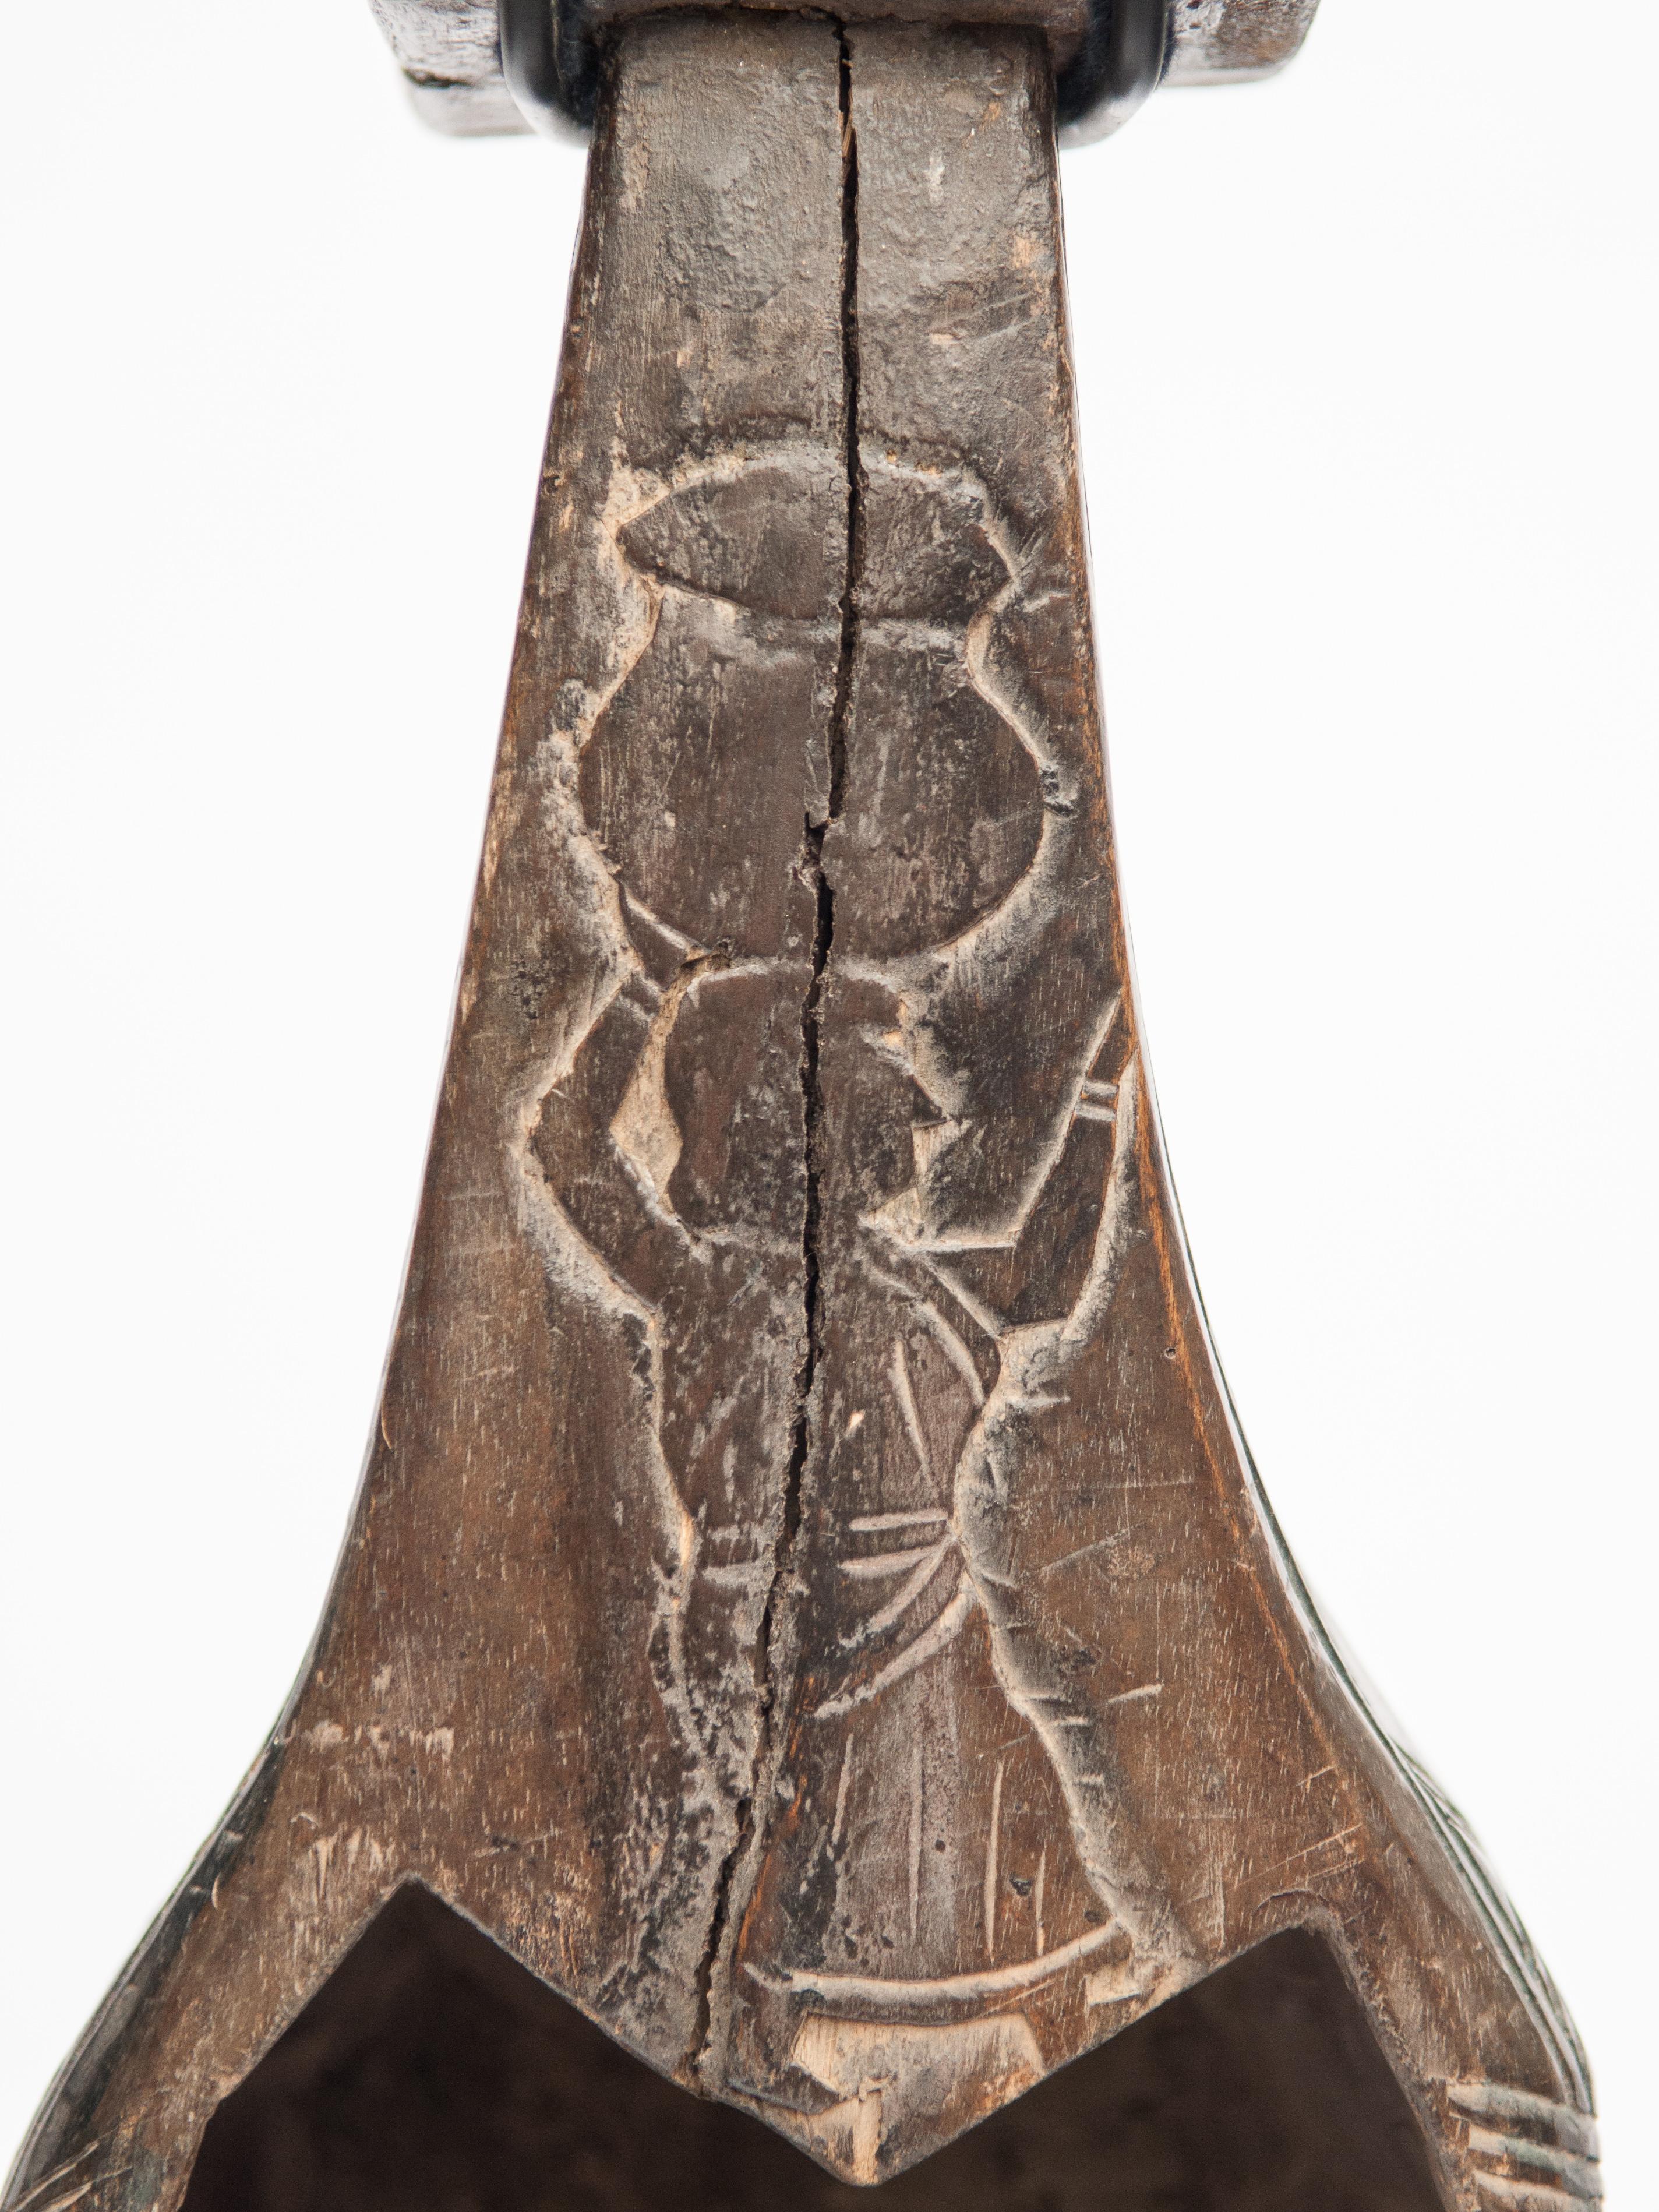 Hand-Carved Tribal Hand Carved Lute or Sarangi, the Santal of North India, Mid-20th Century